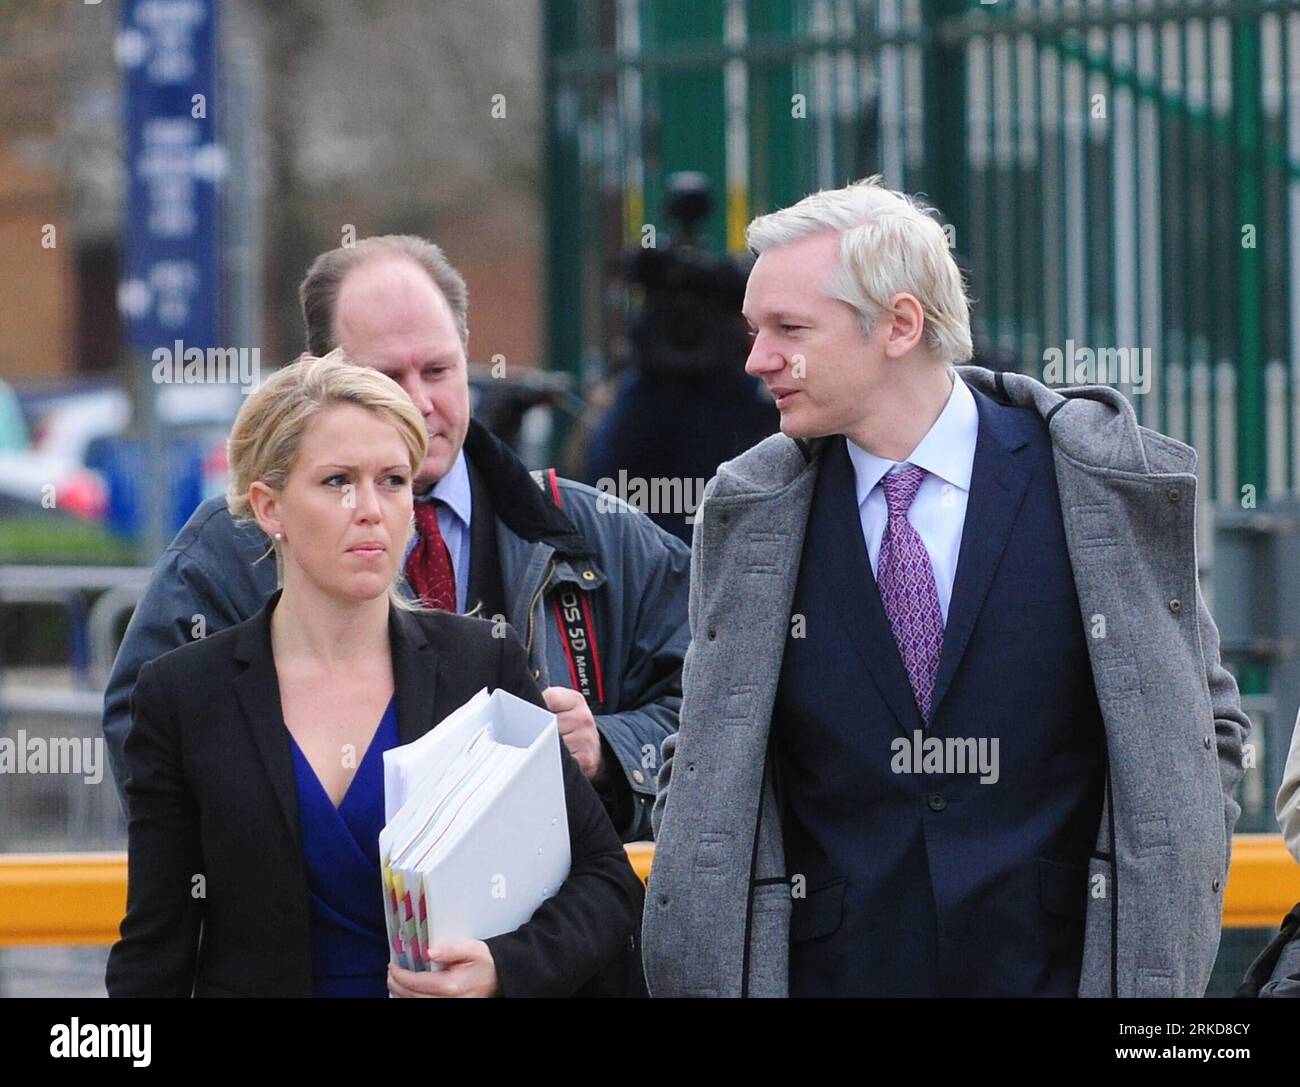 Bildnummer: 54885763  Datum: 07.02.2011  Copyright: imago/Xinhua (110207) -- LONDON, Feb. 7, 2011 (Xinhua) -- Wikileaks founder Julian Assange (R) and his lawyer Jennifer Robinson arrive at Belmarsh Magistrates Court in London to attend a two-day final hearing examining his extradition to Sweden, Feb. 7, 2011. (Xinhua/Zeng Yi) (djj) BRITAIN-WIKILEAKS-ASSANGE-HEARING PUBLICATIONxNOTxINxCHN People Politik kbdig xdp 2011 quer Highlight premiumd     Bildnummer 54885763 Date 07 02 2011 Copyright Imago XINHUA  London Feb 7 2011 XINHUA wikileaks Founder Julian Assange r and His lawyer Jennifer Robins Stock Photo